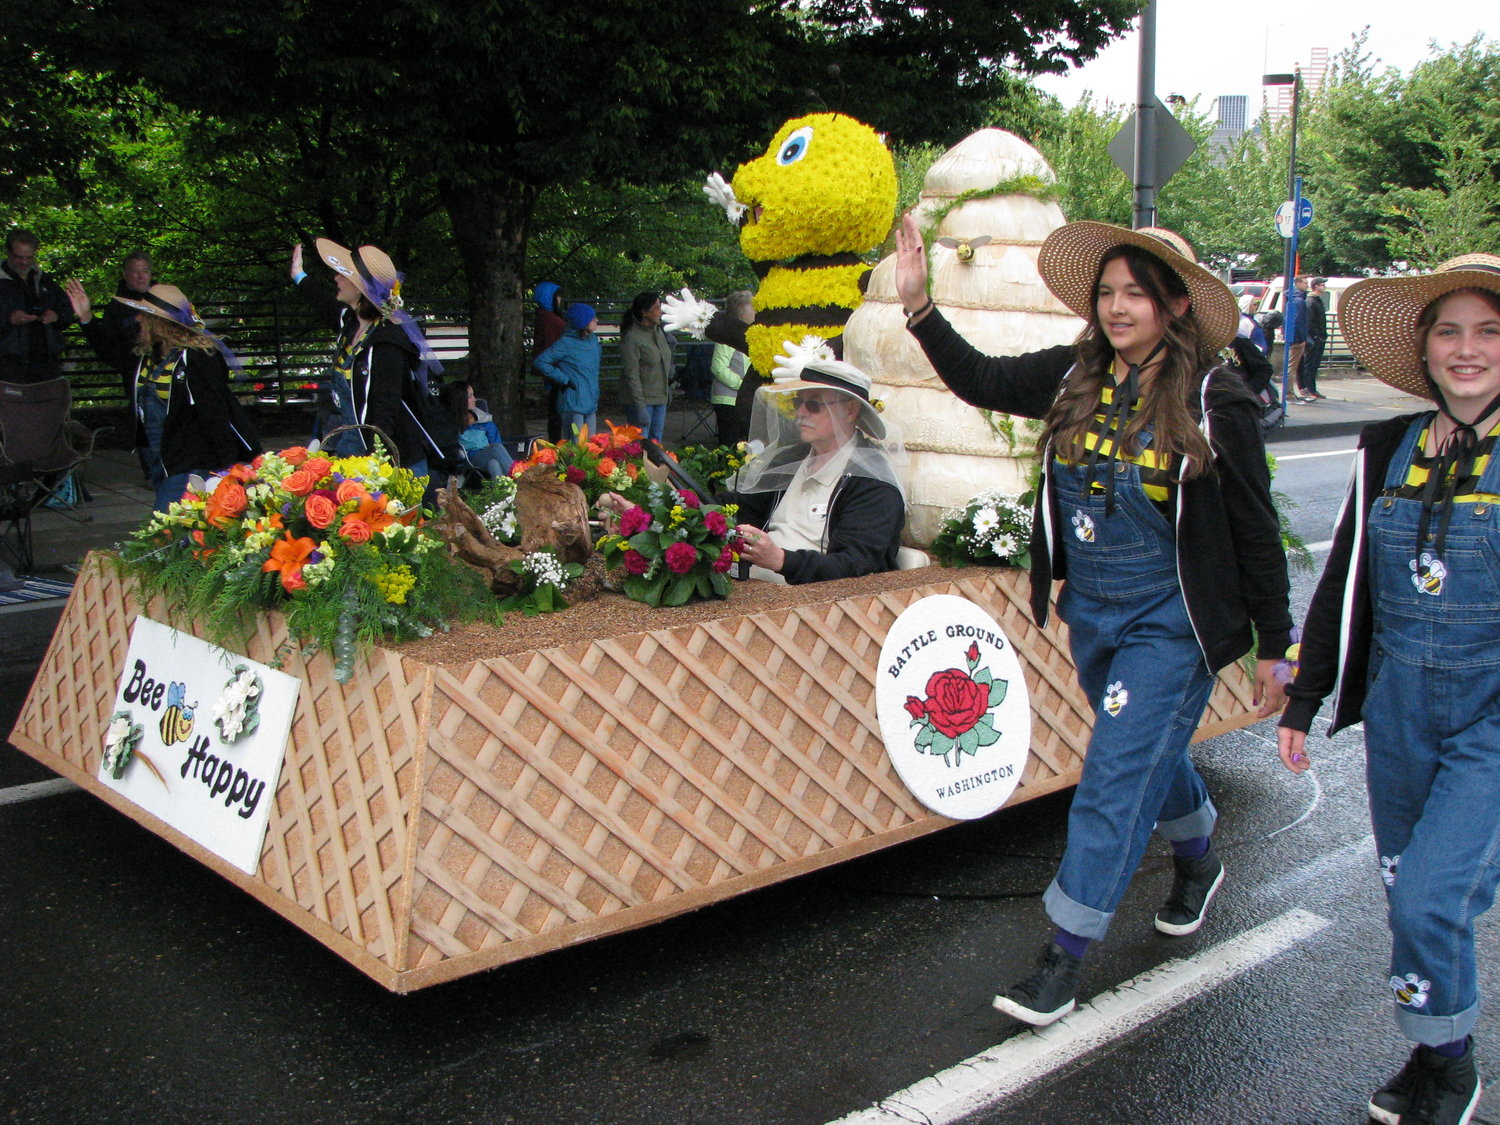 A Battle Ground Rose Float, built entirely by volunteers, participated in the Portland Grand Floral Parade June 9. Walking with the “mini” float through the 4.3 mile parade route were princesses, from left, Pamela Lopez, Rebecca Strizver, Kiana Skinner and Sarah Vonk. Darrell McClellan is the driver.